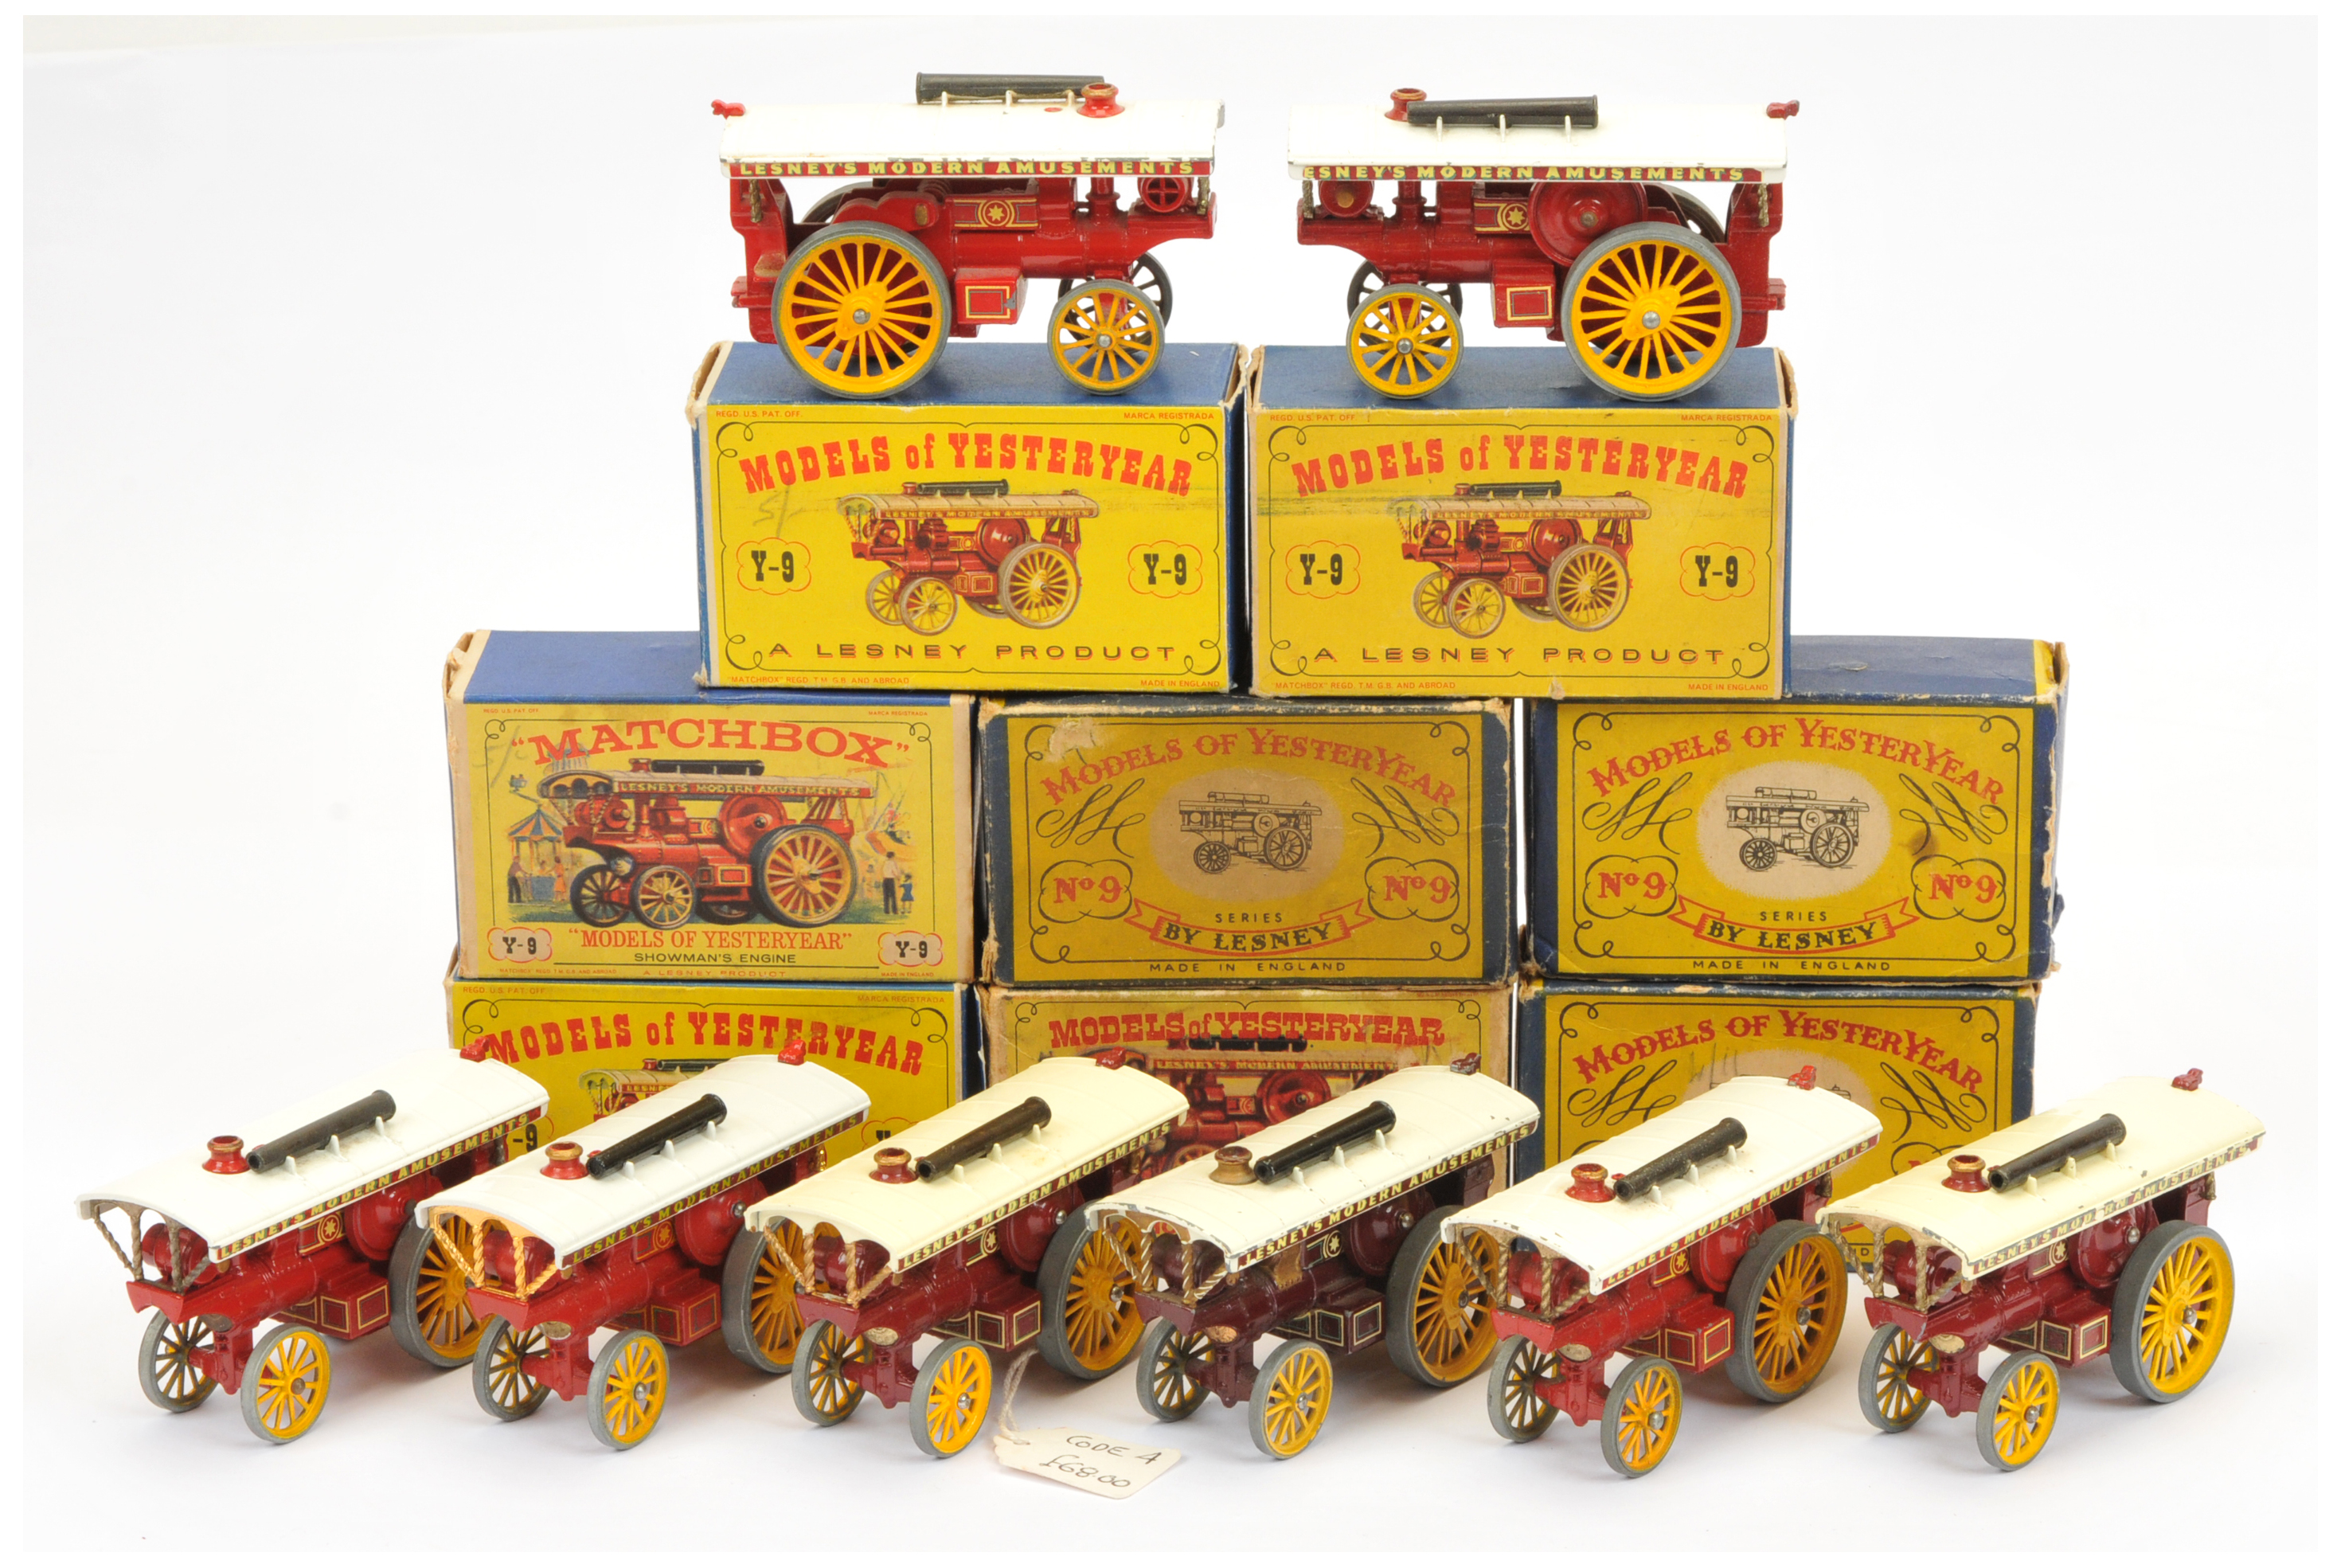 Matchbox Models Of Yesteryear Group 8 - Y1 Allchin Traction Engines - Variations Include Red body...